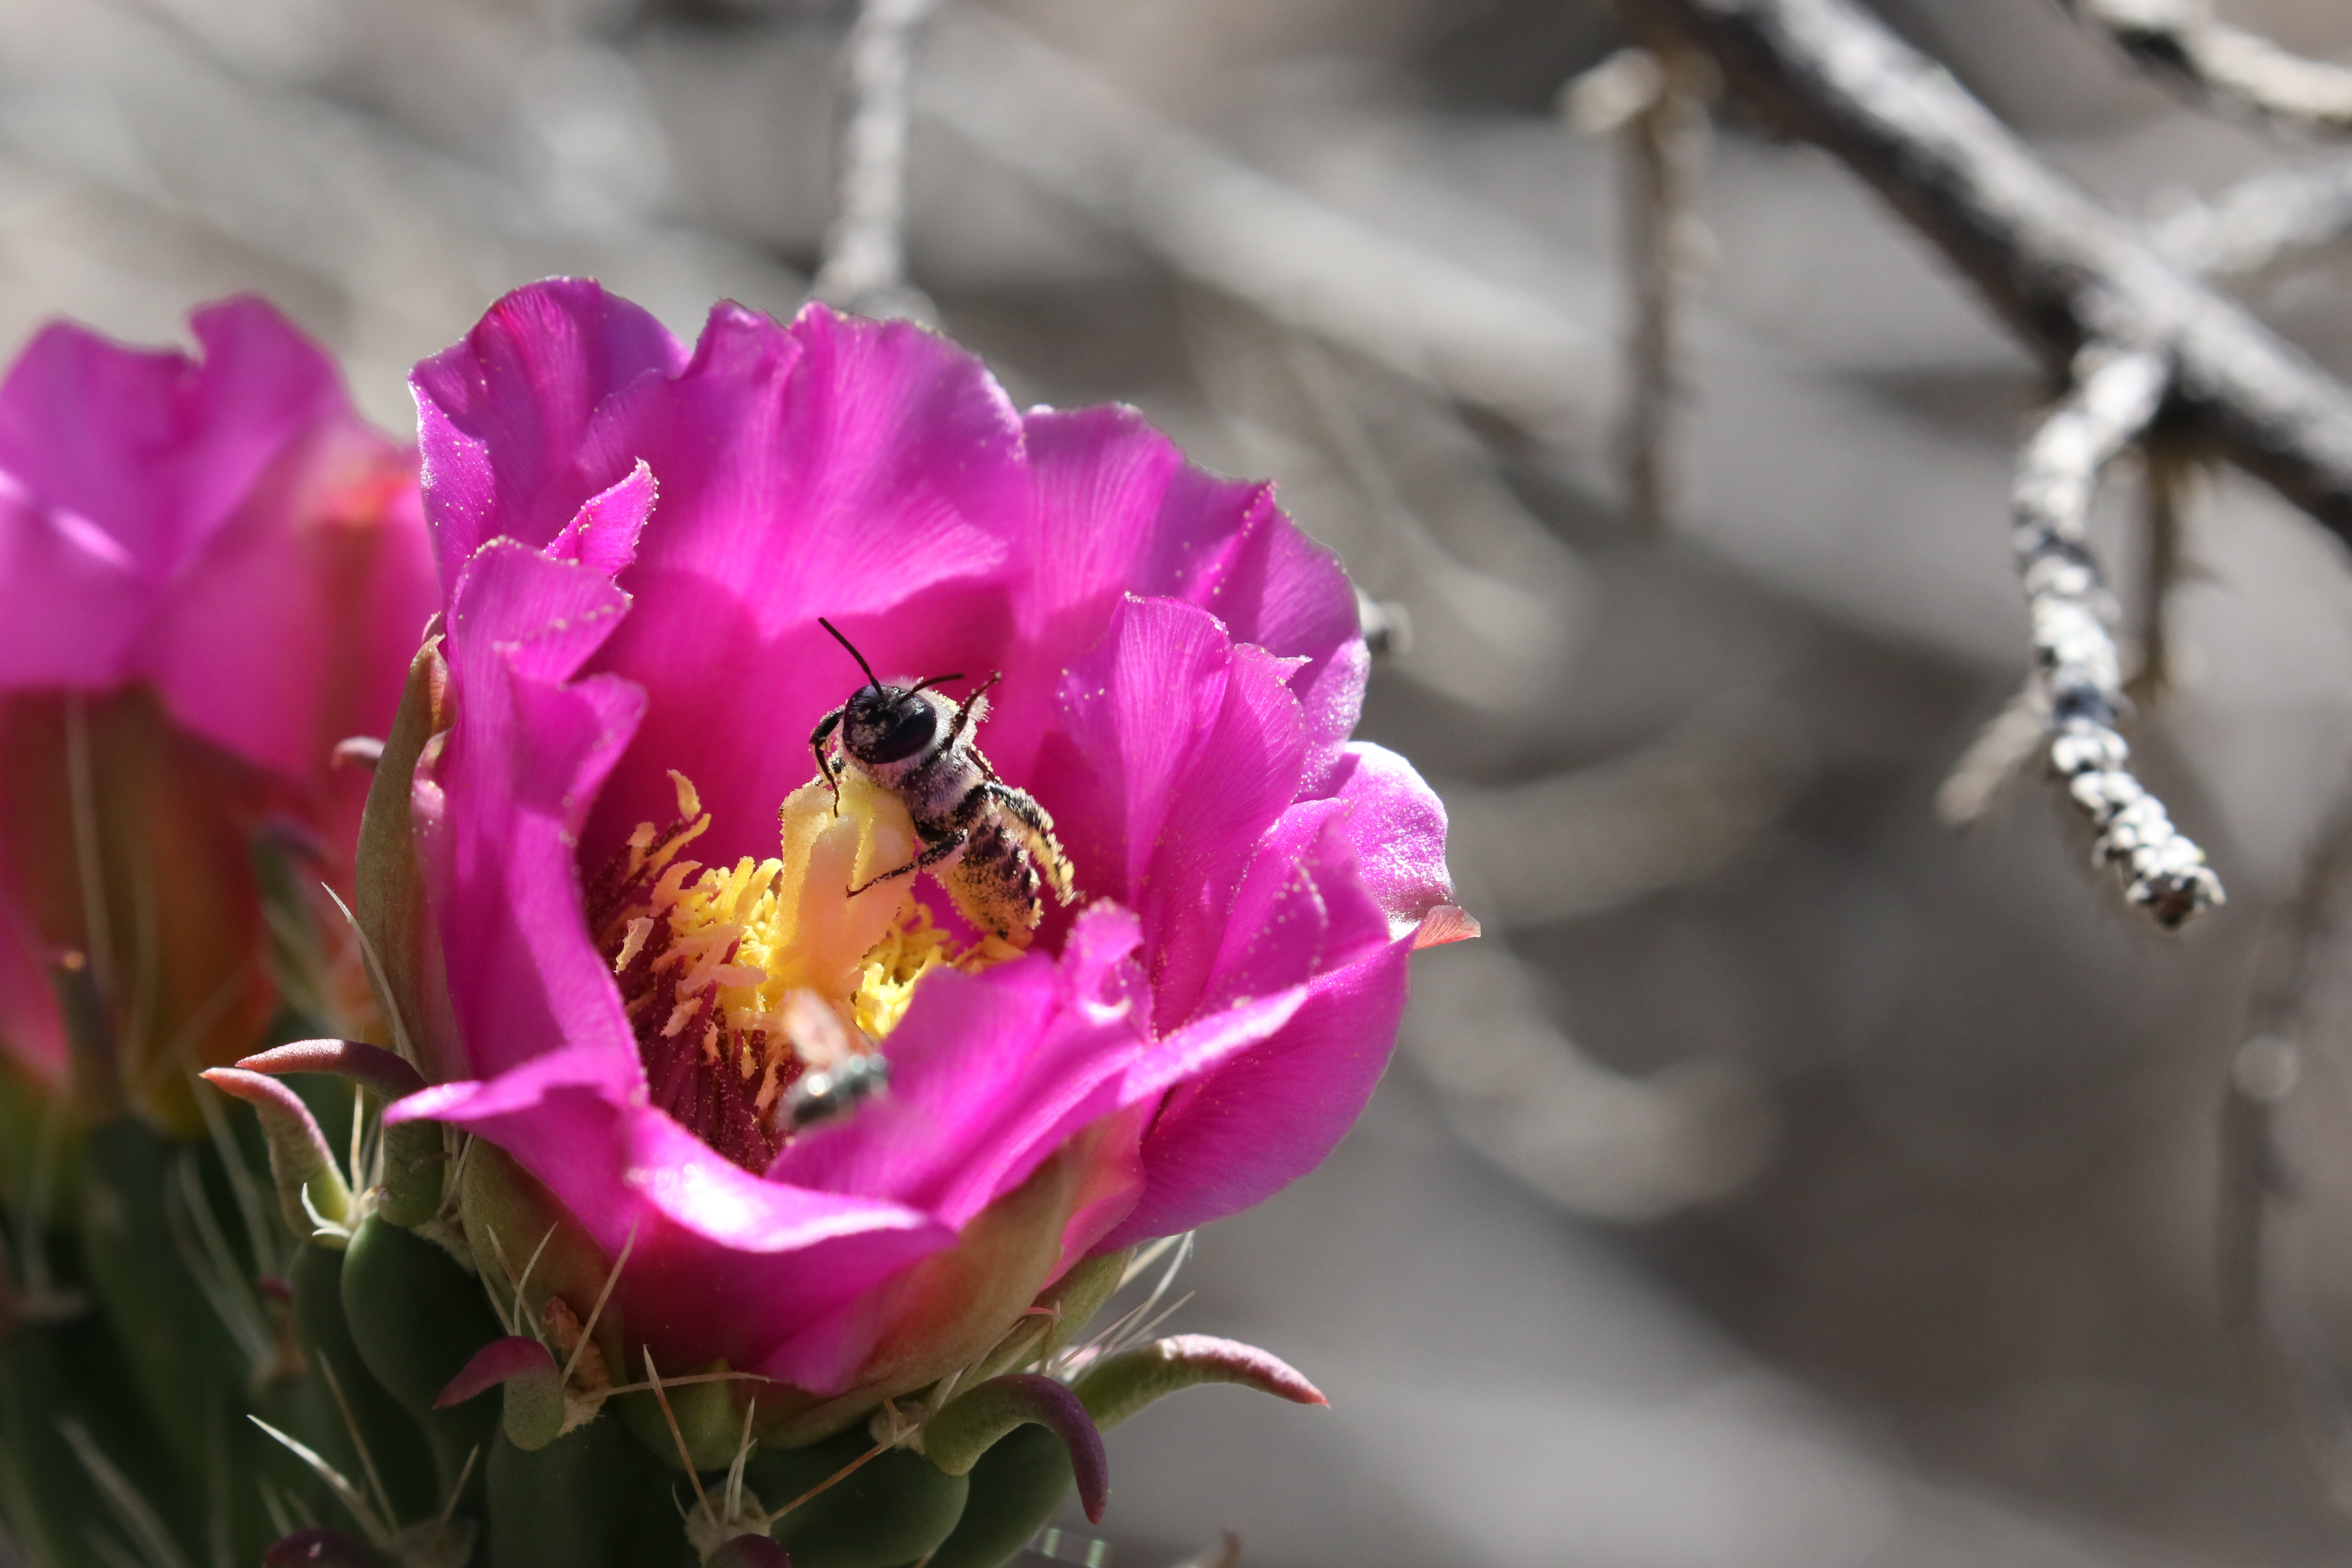 A small bee peers out of the center of a large, pink cactus flower, which is somewhat shaped like a cup.